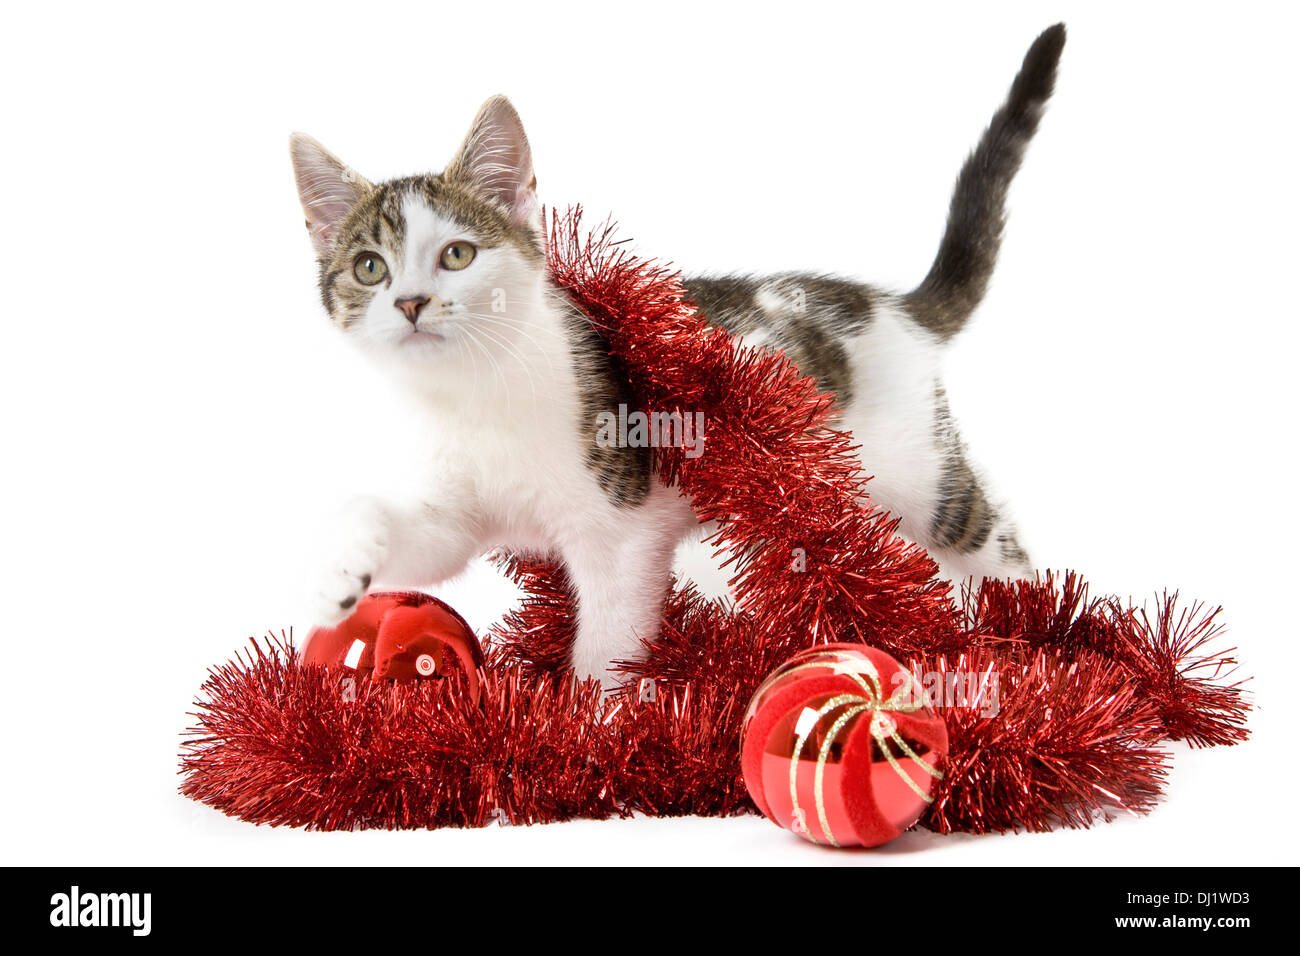 Tabby and White Kitten playing isolated on white background. Stock Photo